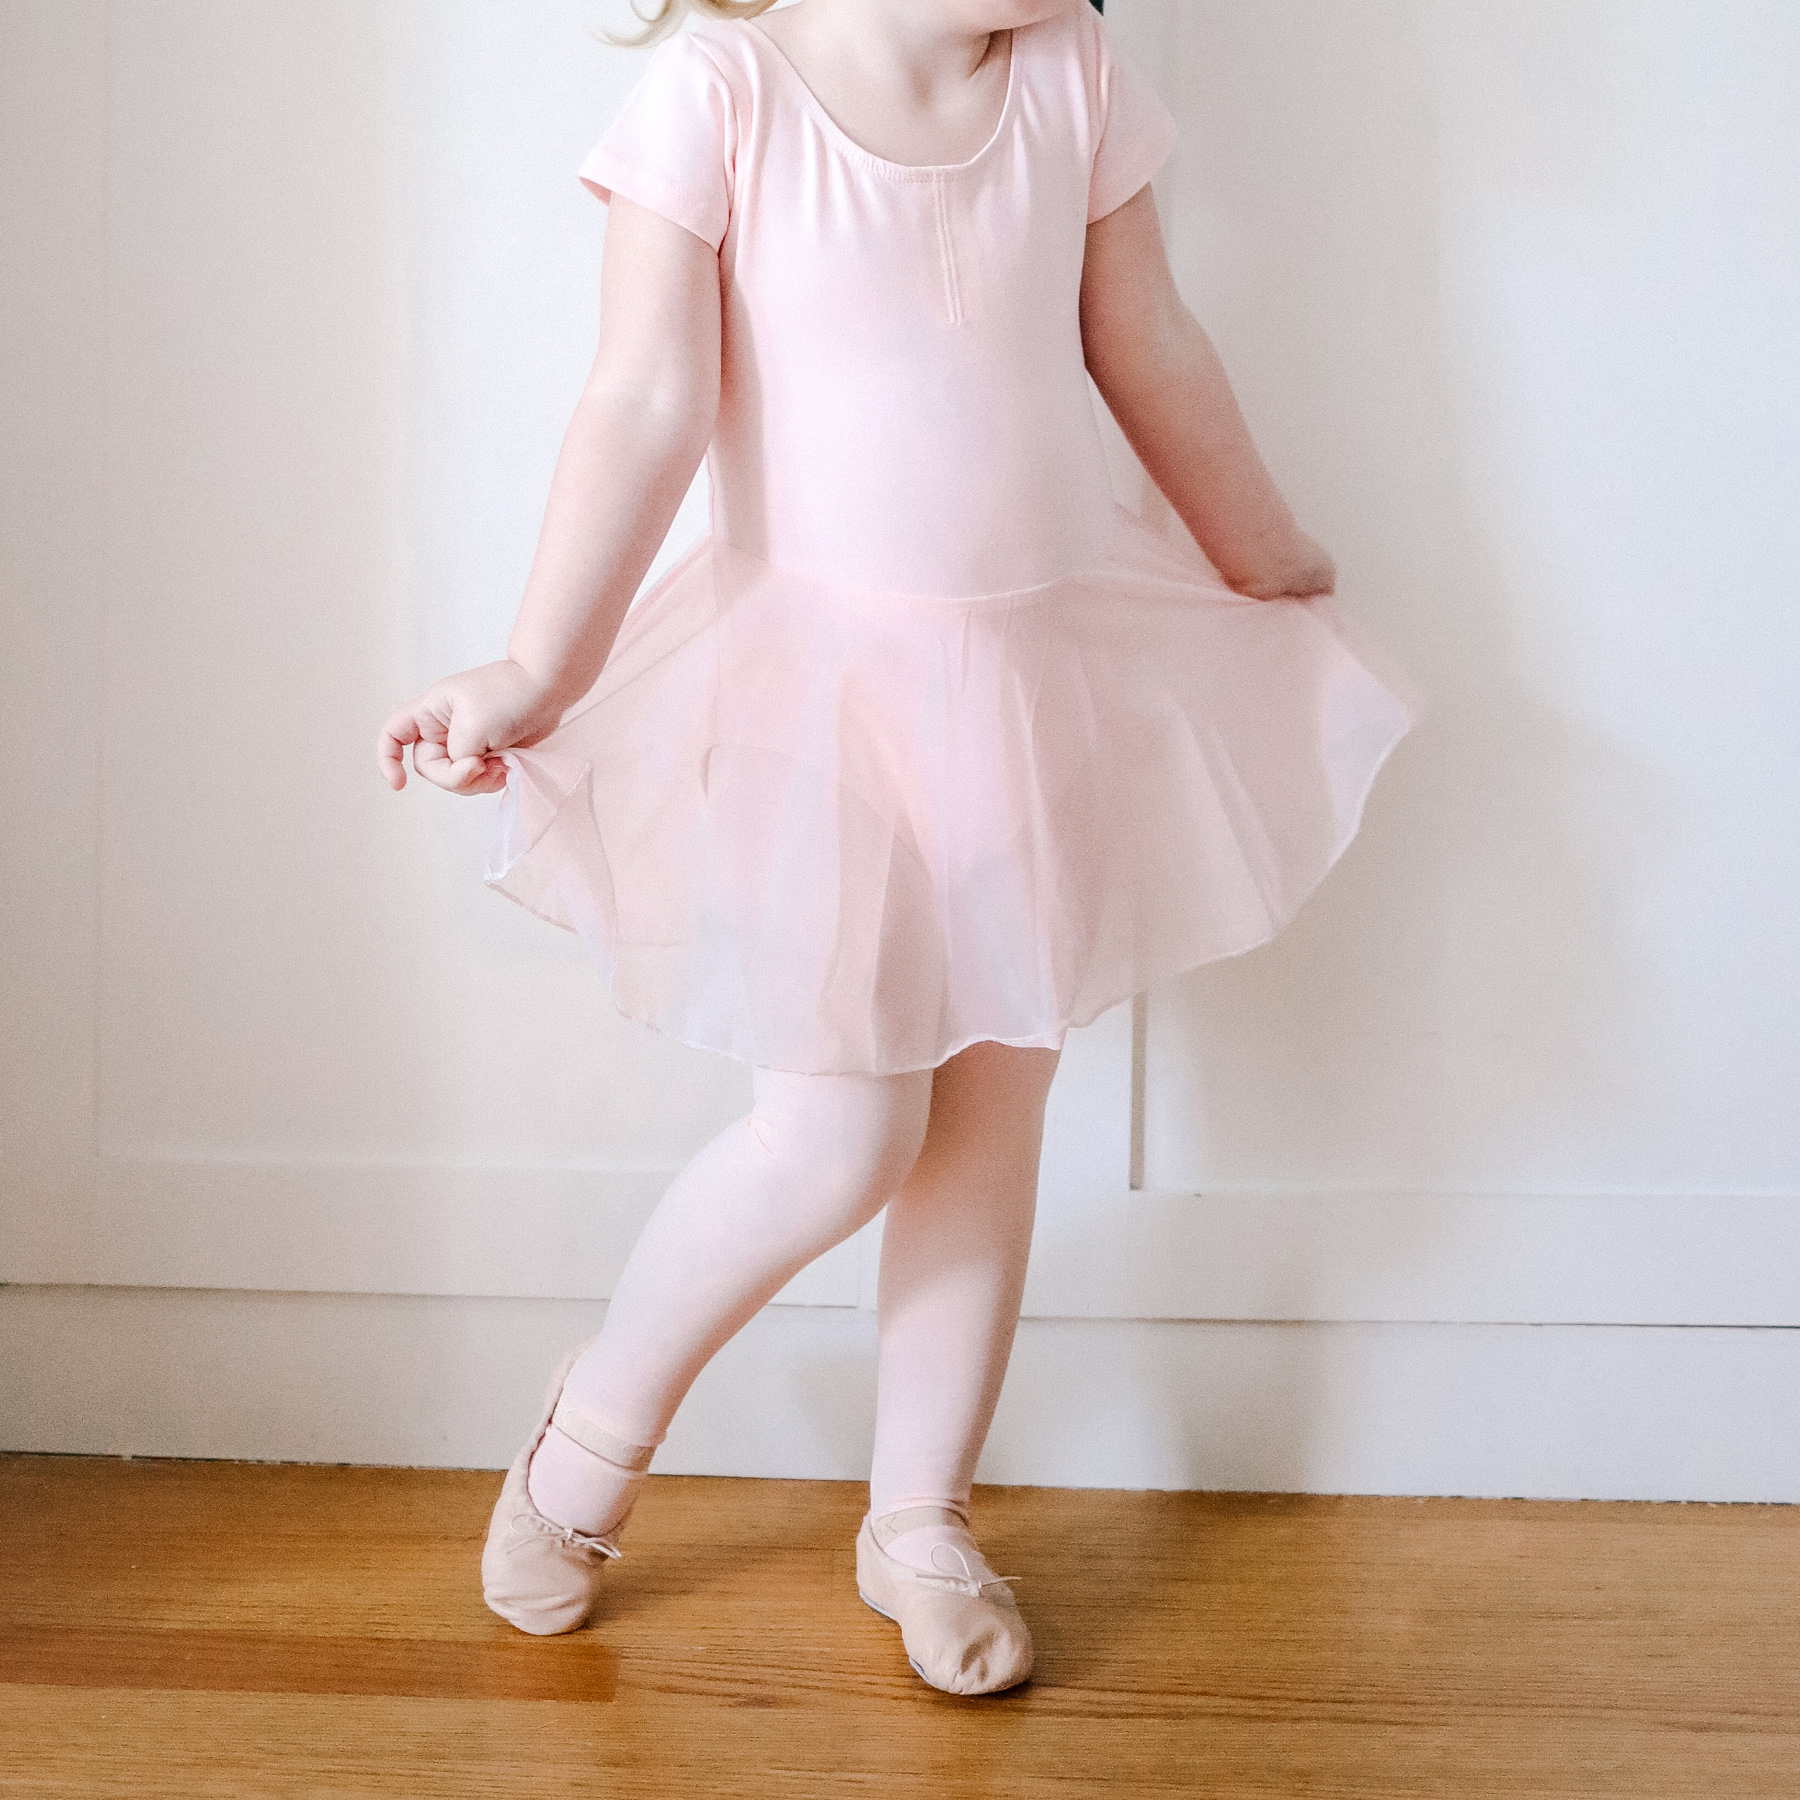 infant ballet outfit